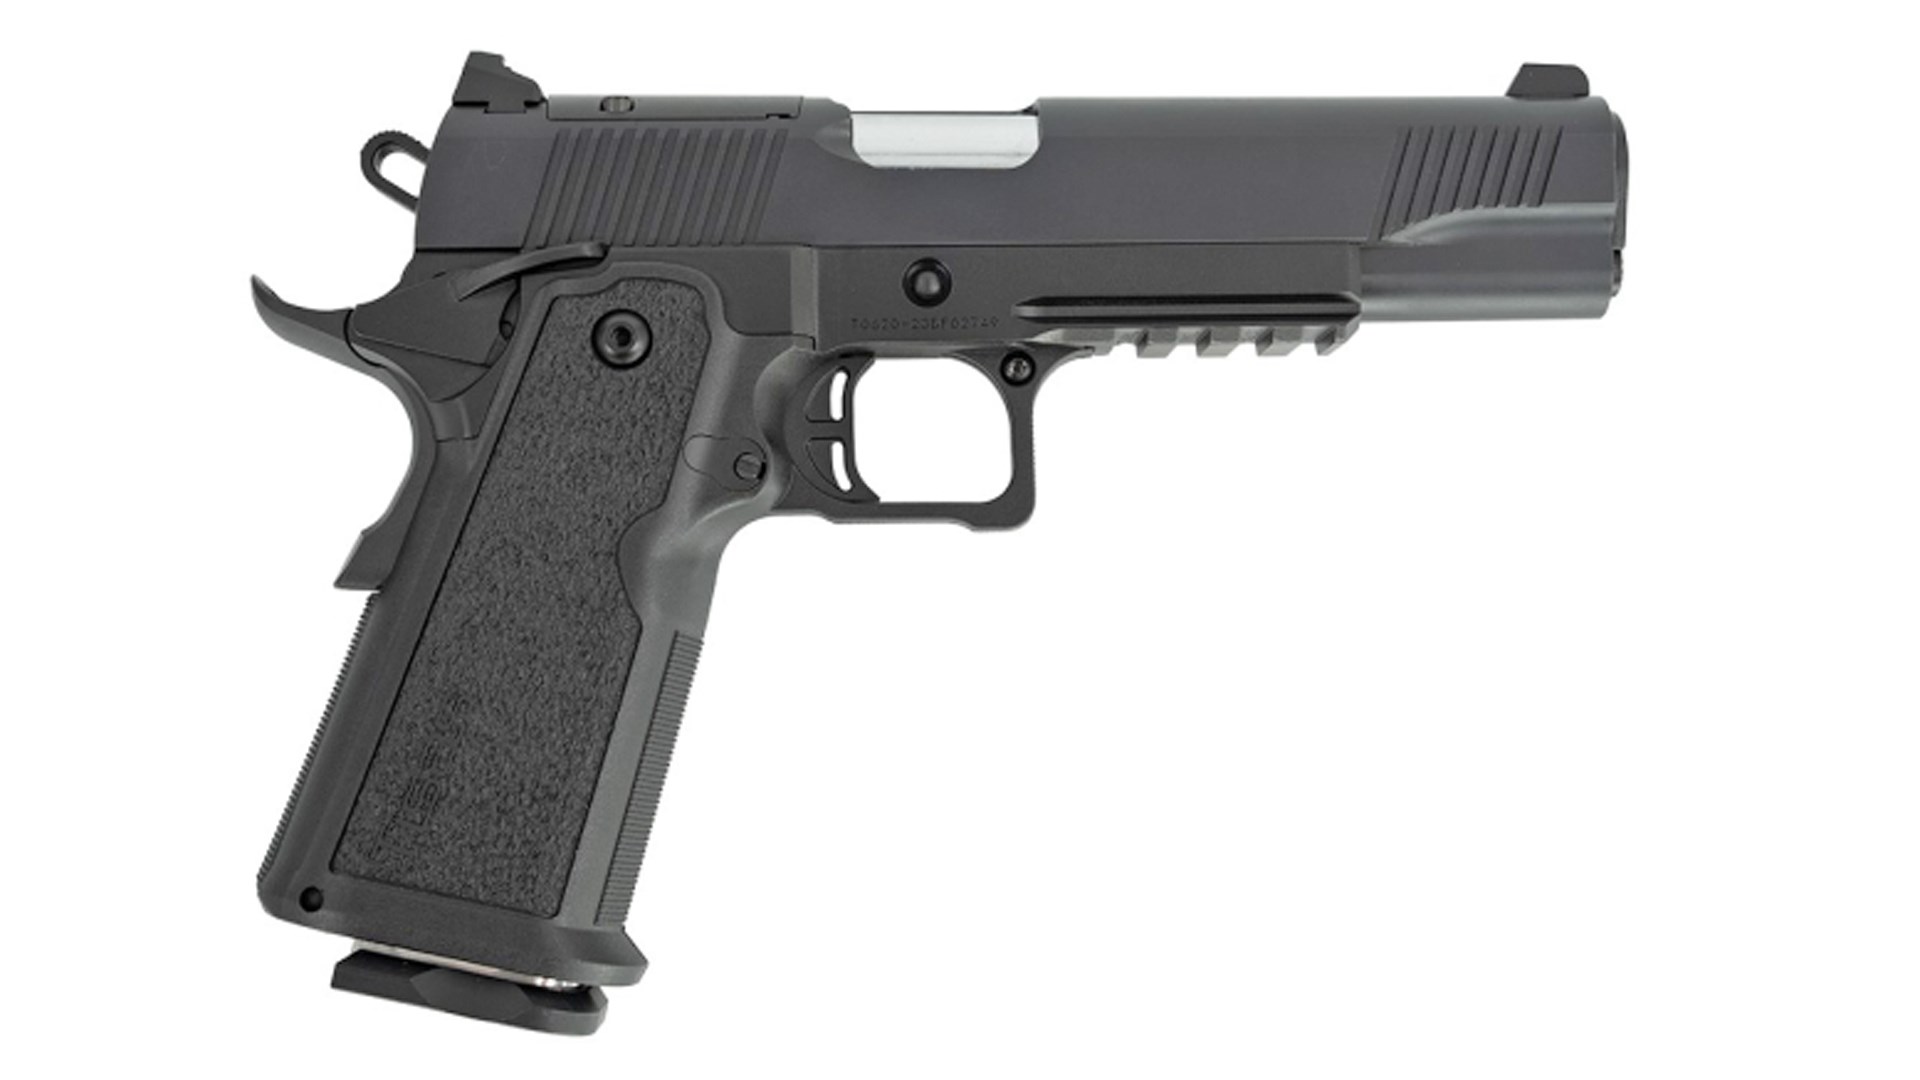 Right side of the Tisas B9R DS pistol.